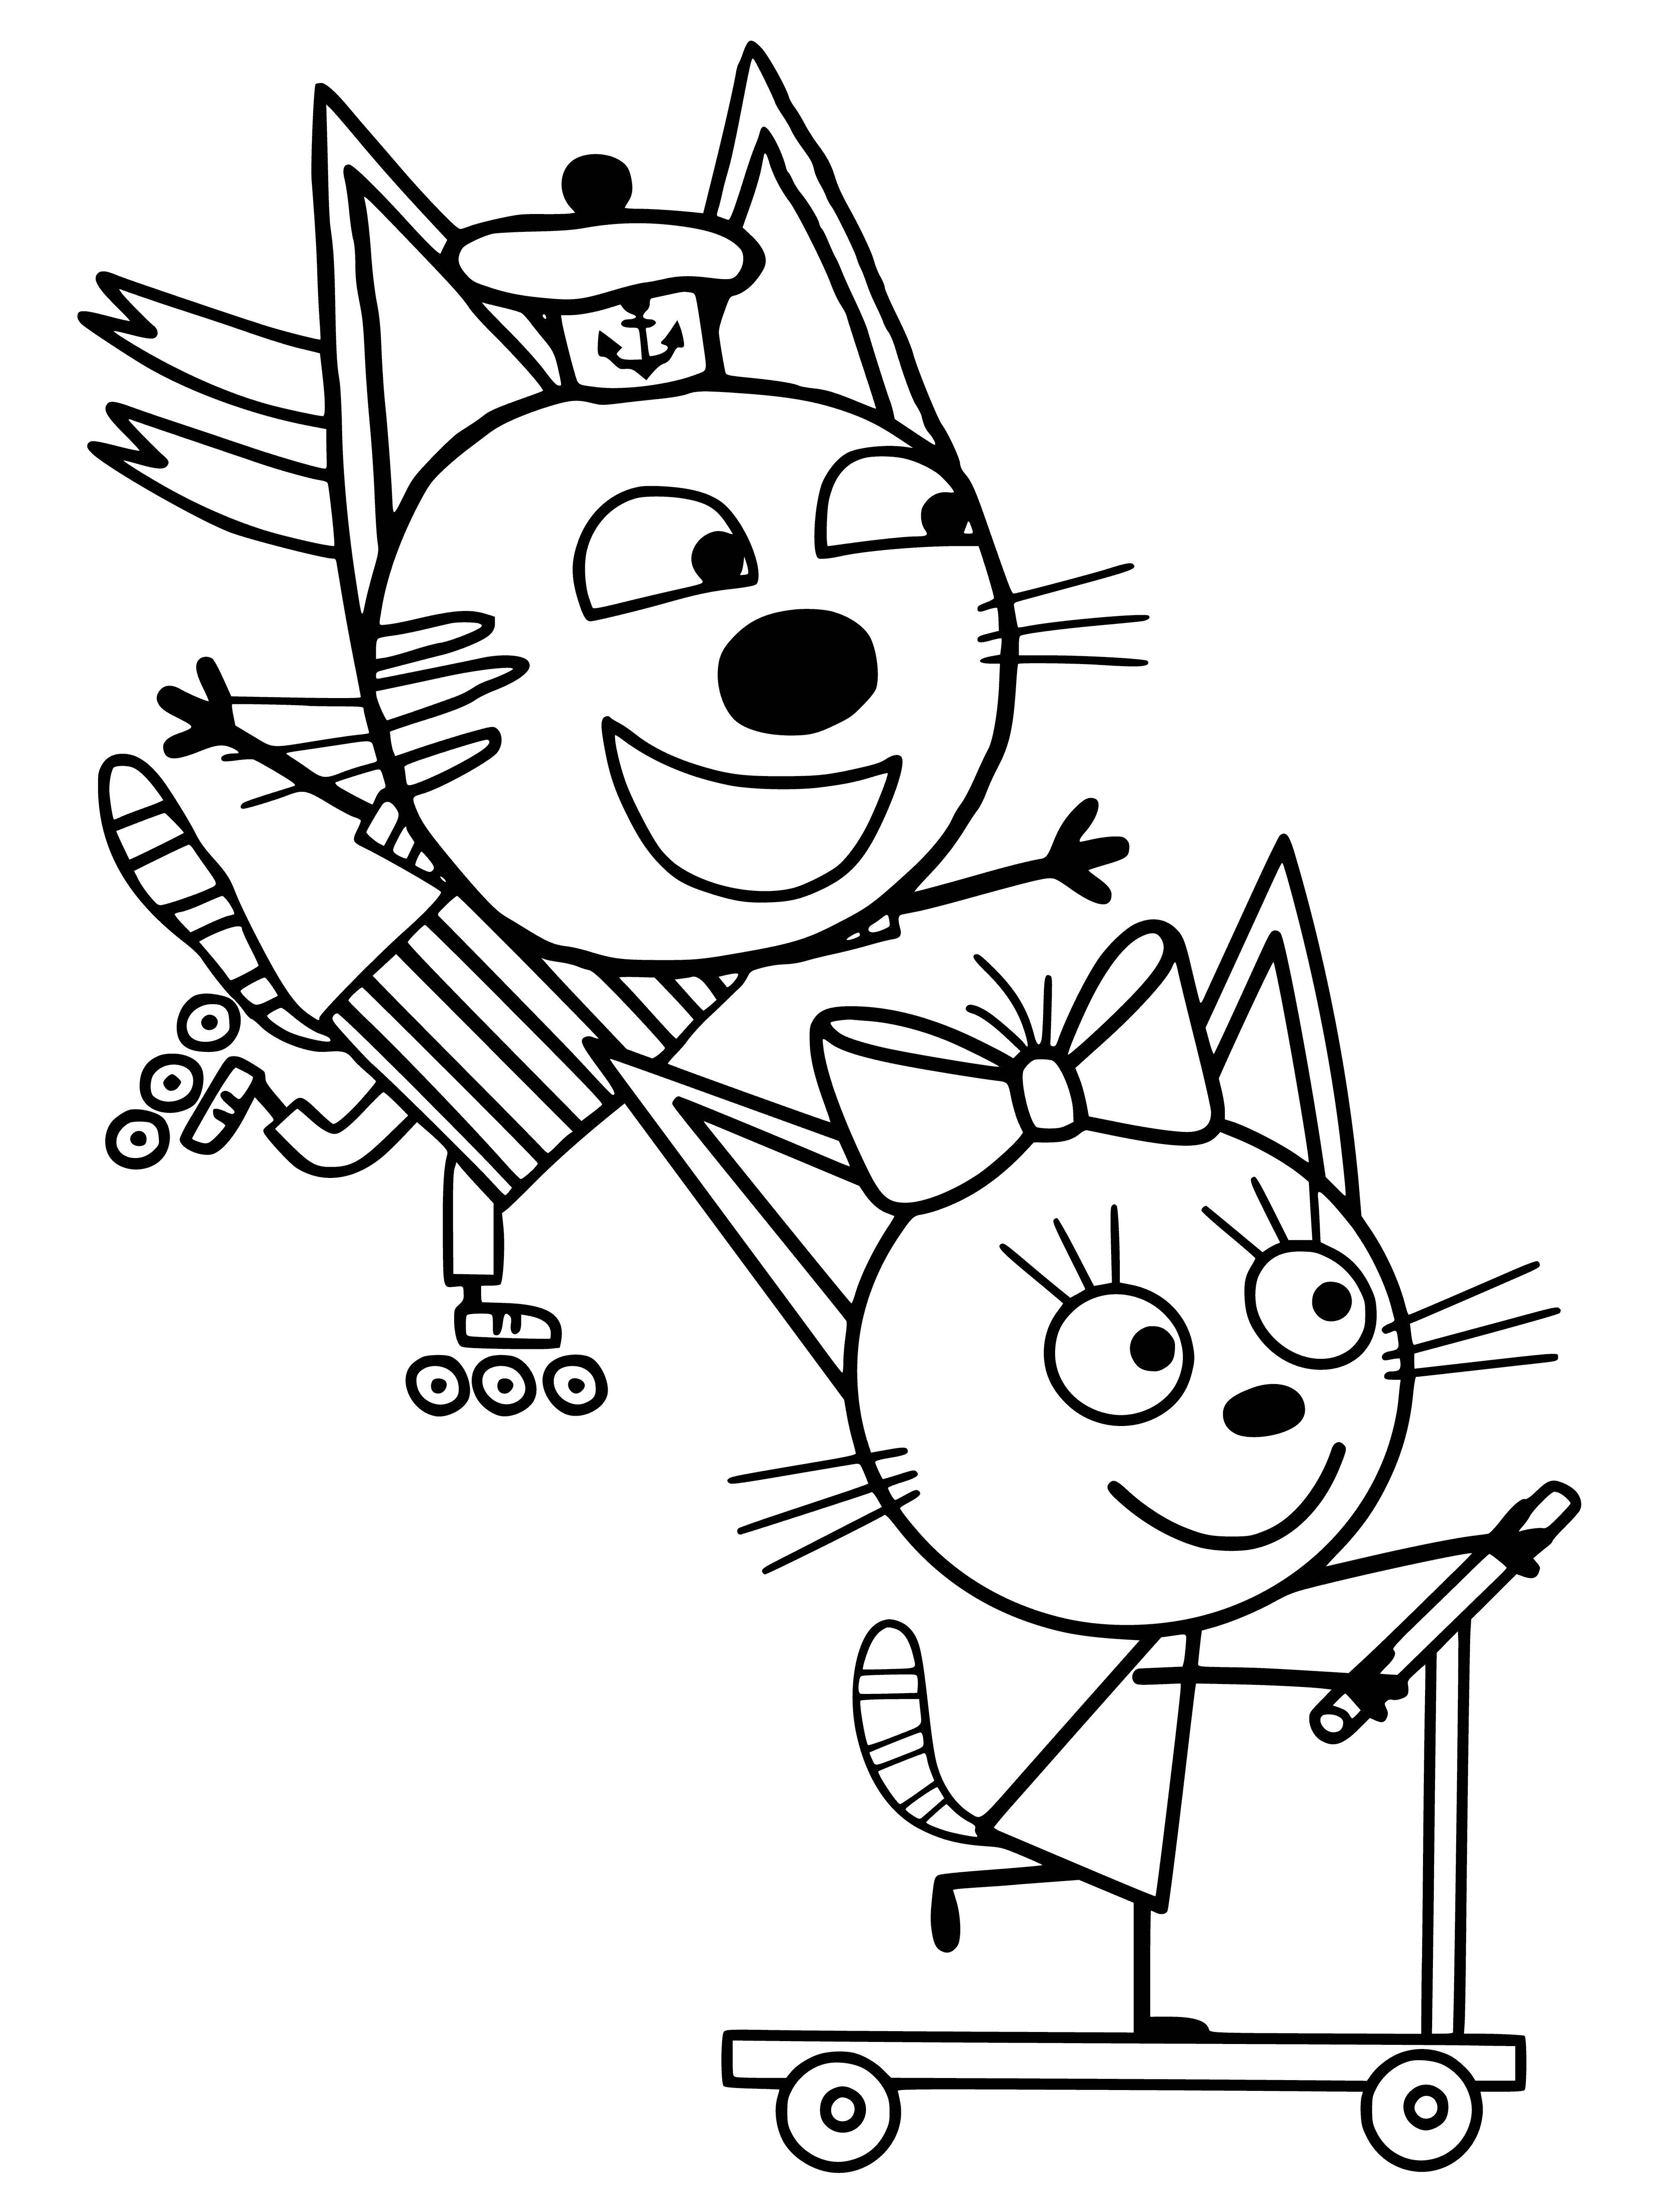 coloring page: Cats in foreground look at something to the right, while a third tortoiseshell cat observes in the background.